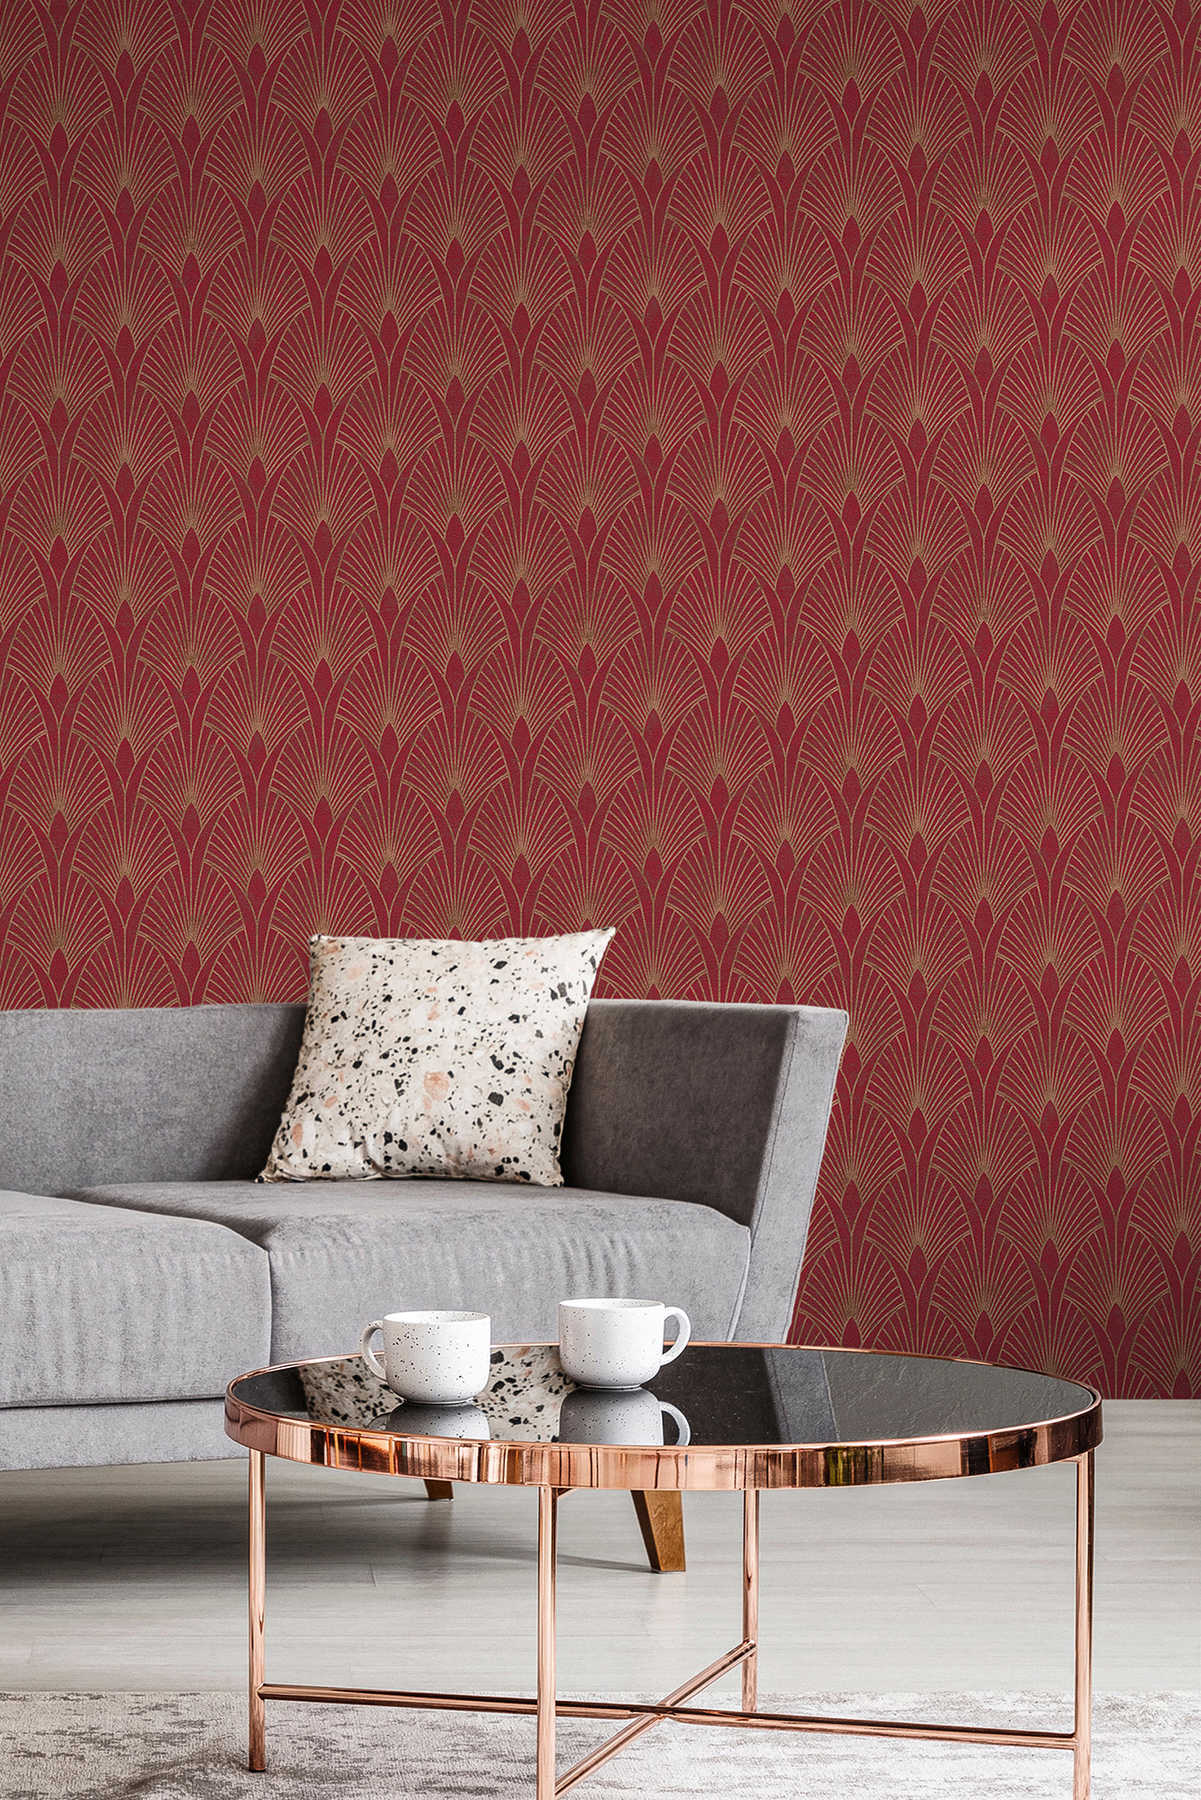             Art Déco Tapete goldenes Retro Muster – Rot, Gold
        